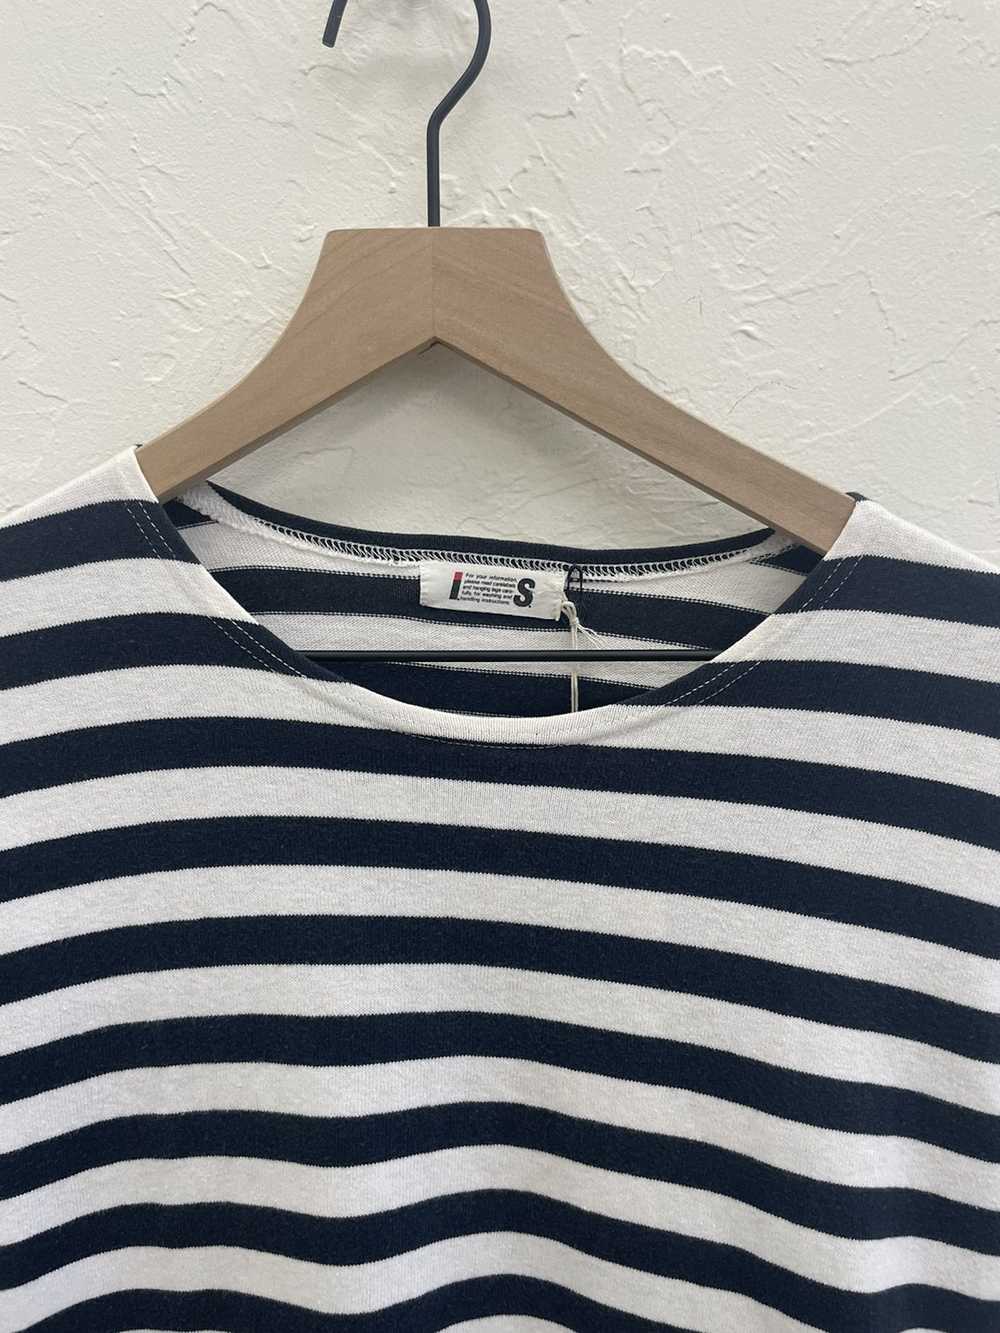 Issey Miyake 1980s IS Striped T-Shirt - image 2